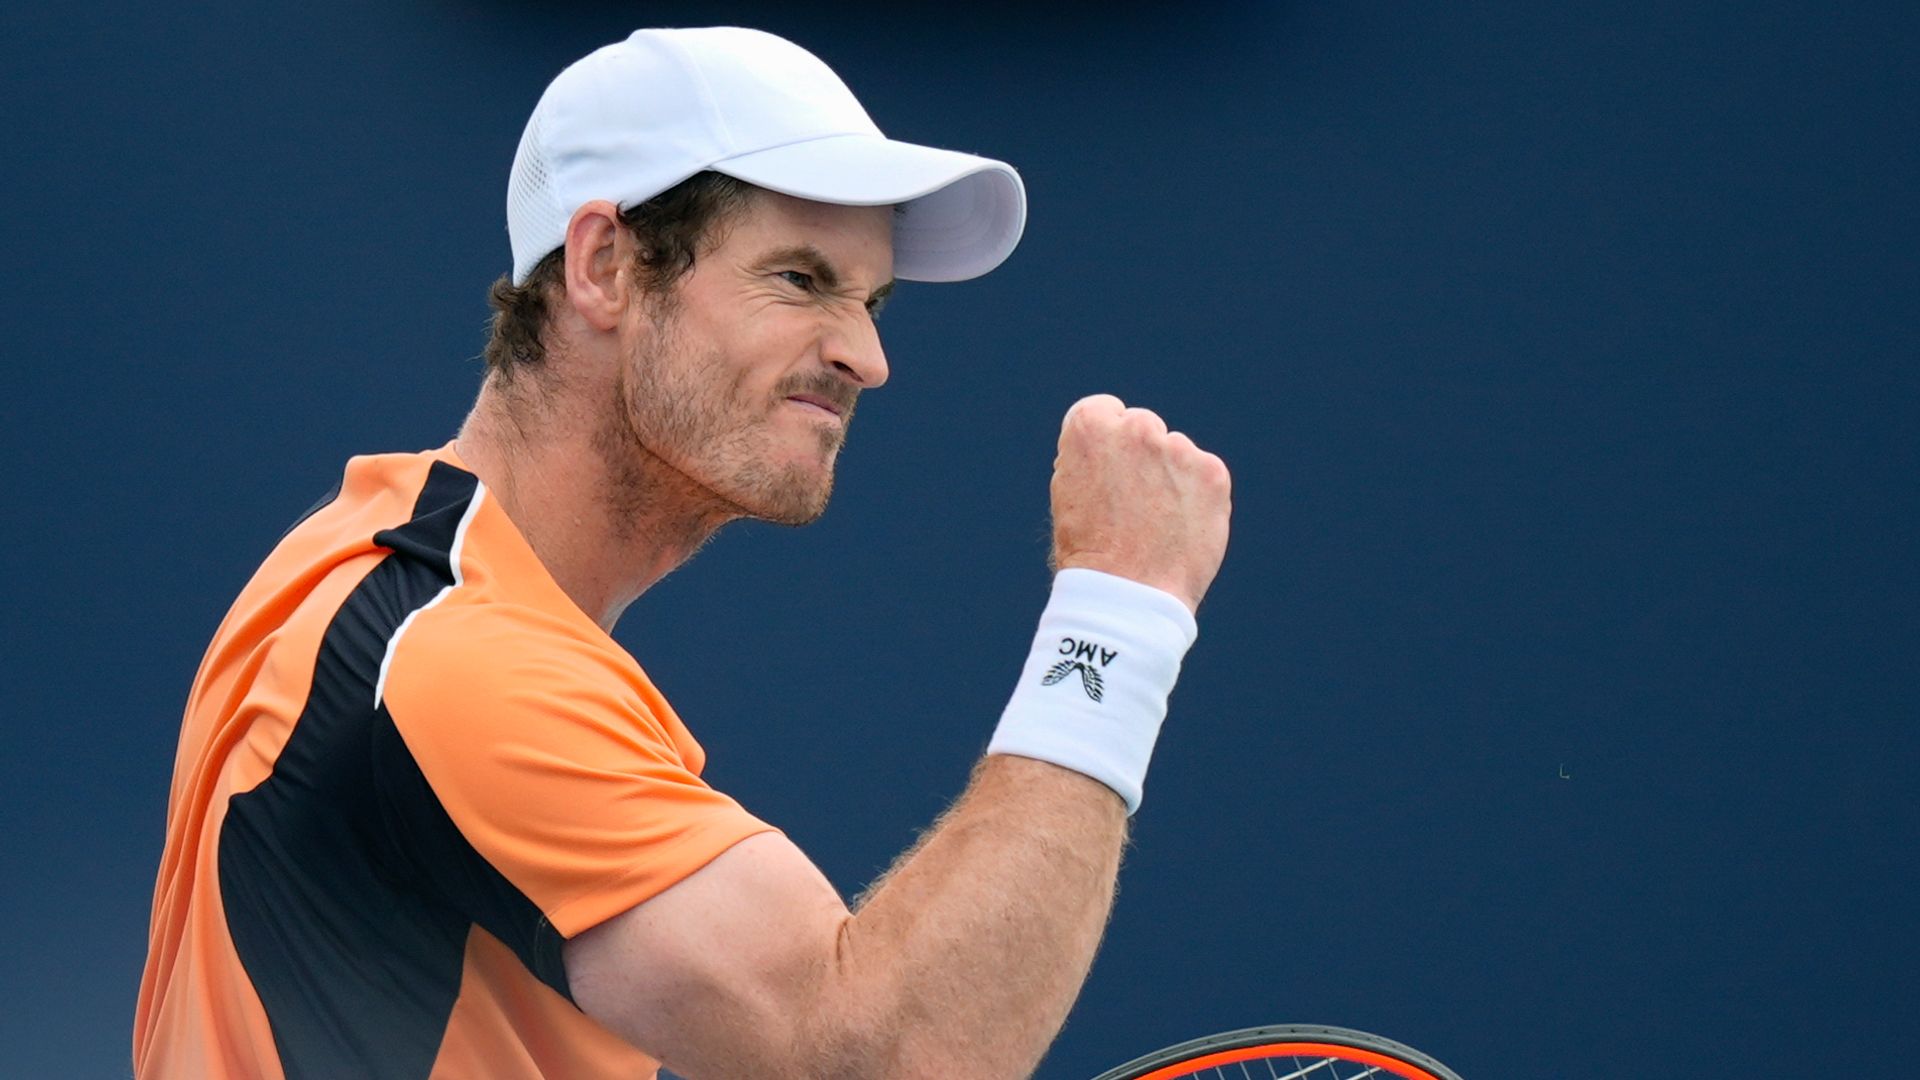 Murray returns to action with victory on 37th birthday